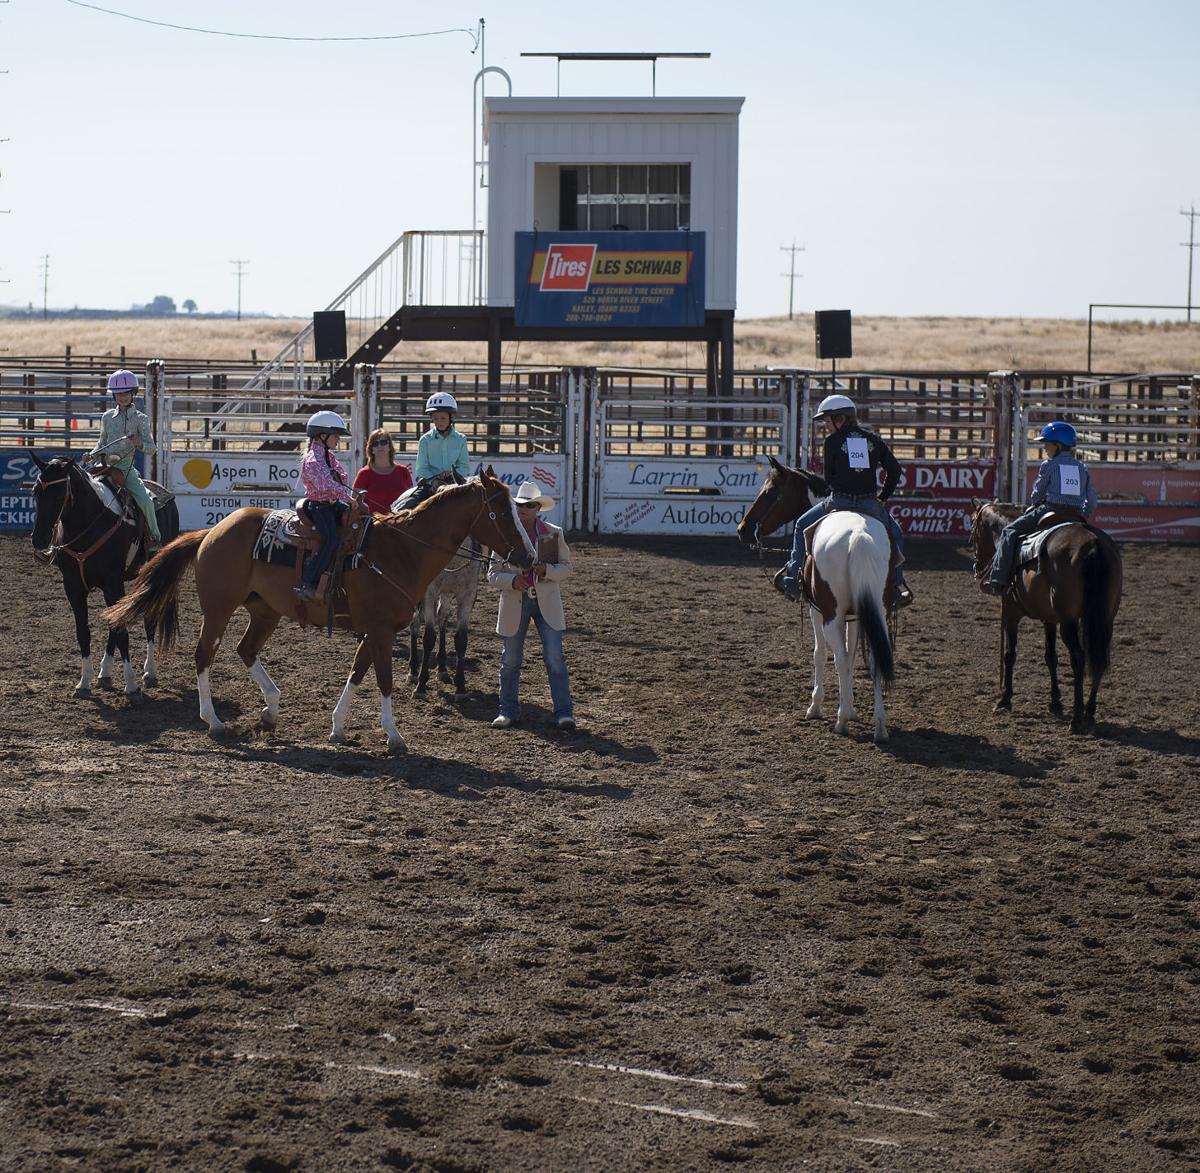 Get ready for a week of fun with the Lincoln County Fair and Rodeo